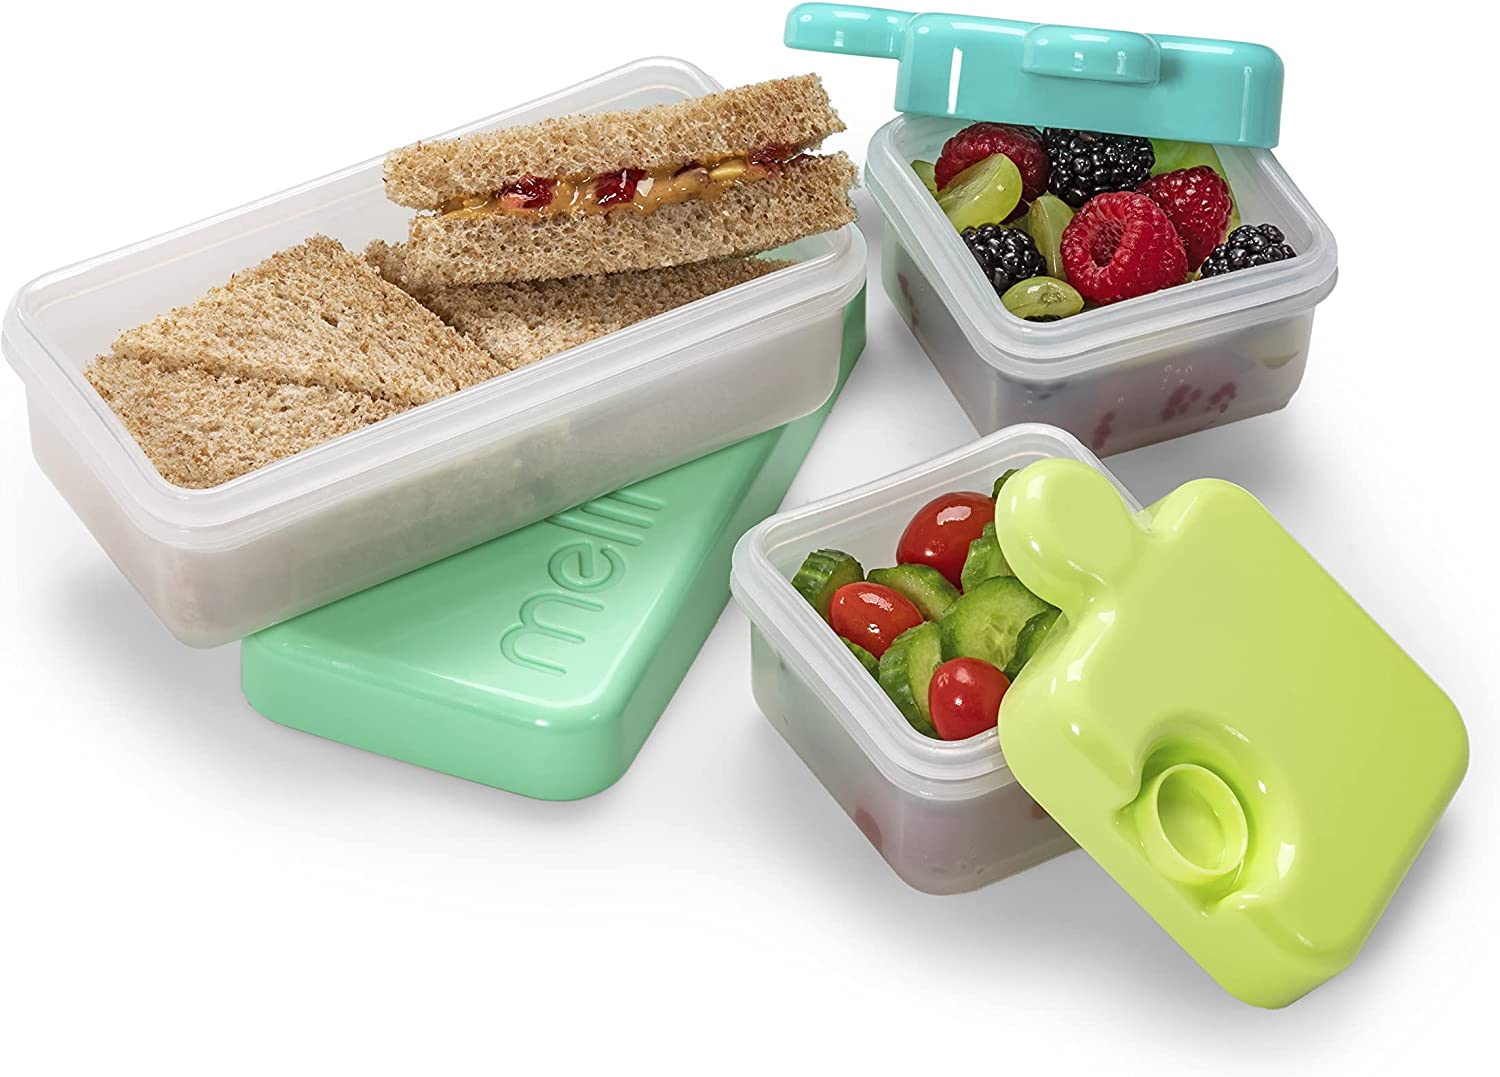  YC Kitchen Salad Container for Lunch, Bento Box Adult